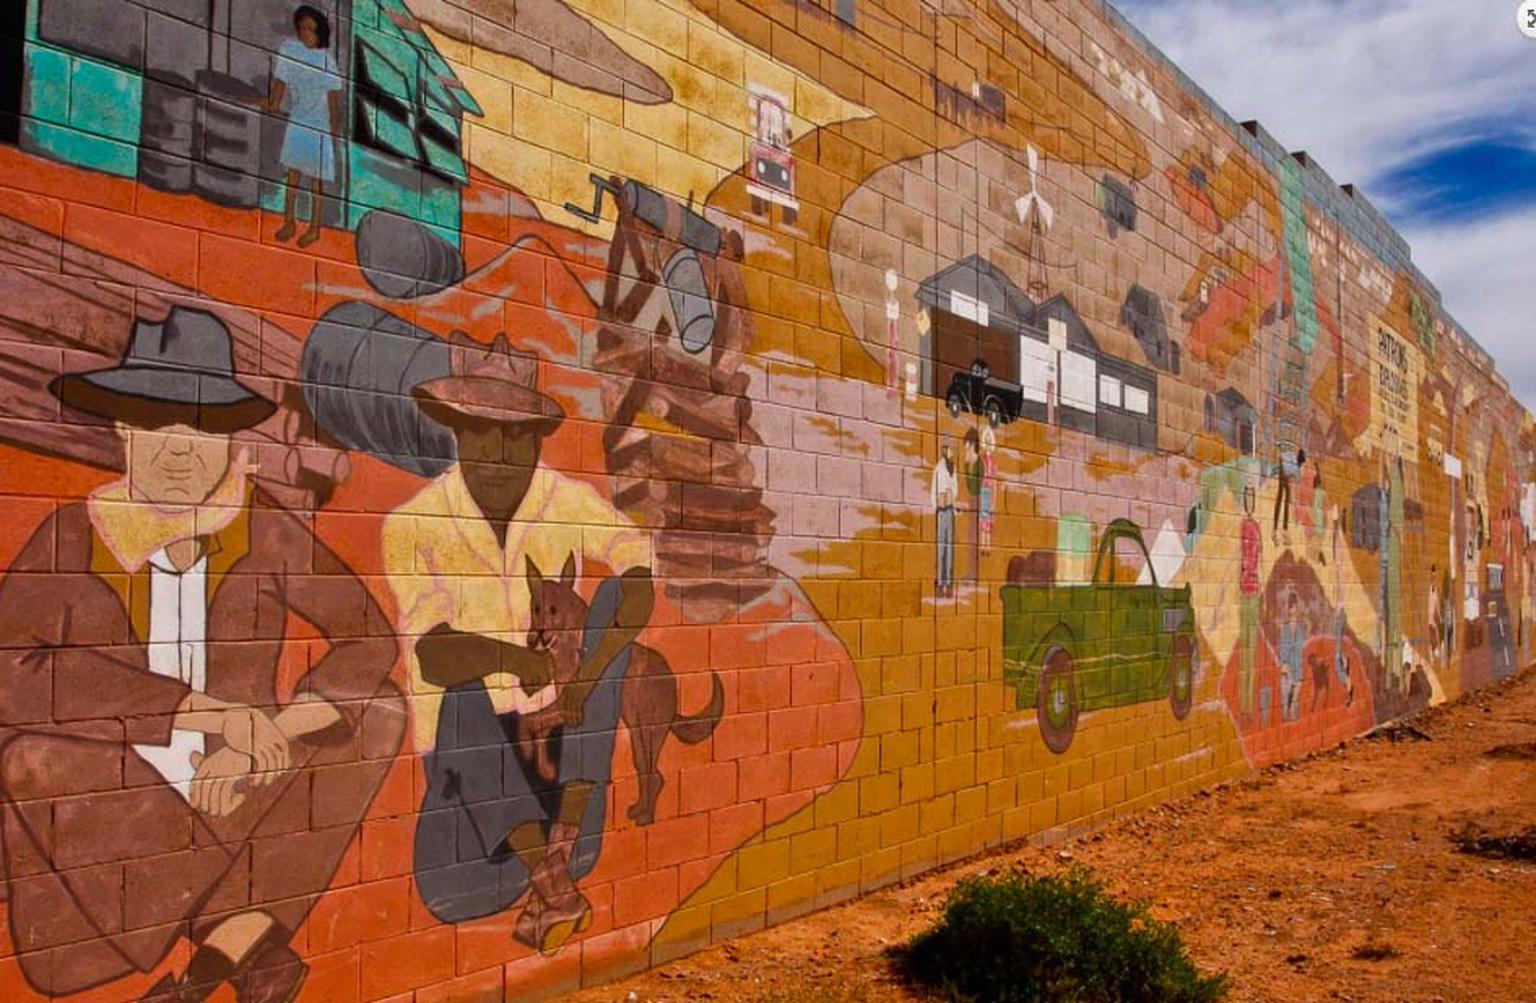 Lucas mural at the local supermarket of Coober Pedy, Australia. Photo: Courtesy of South Cape Photography / District Council of Coober Pedy.